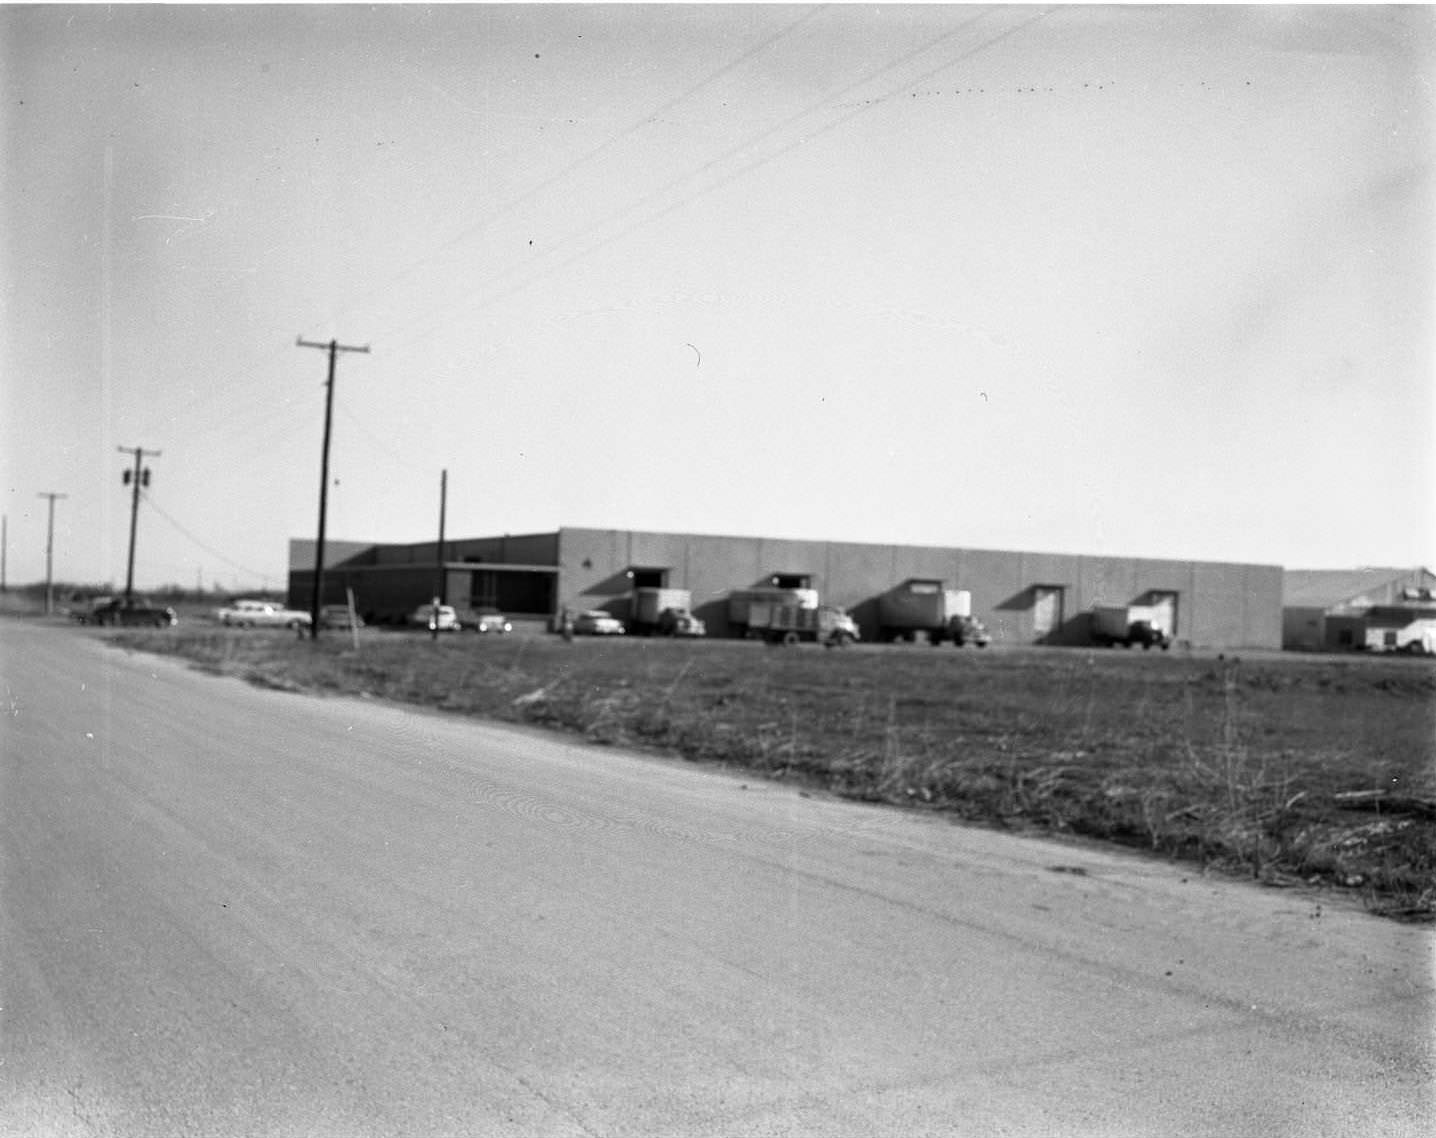 New Mayflower Moving Building on W. N. First, 1958